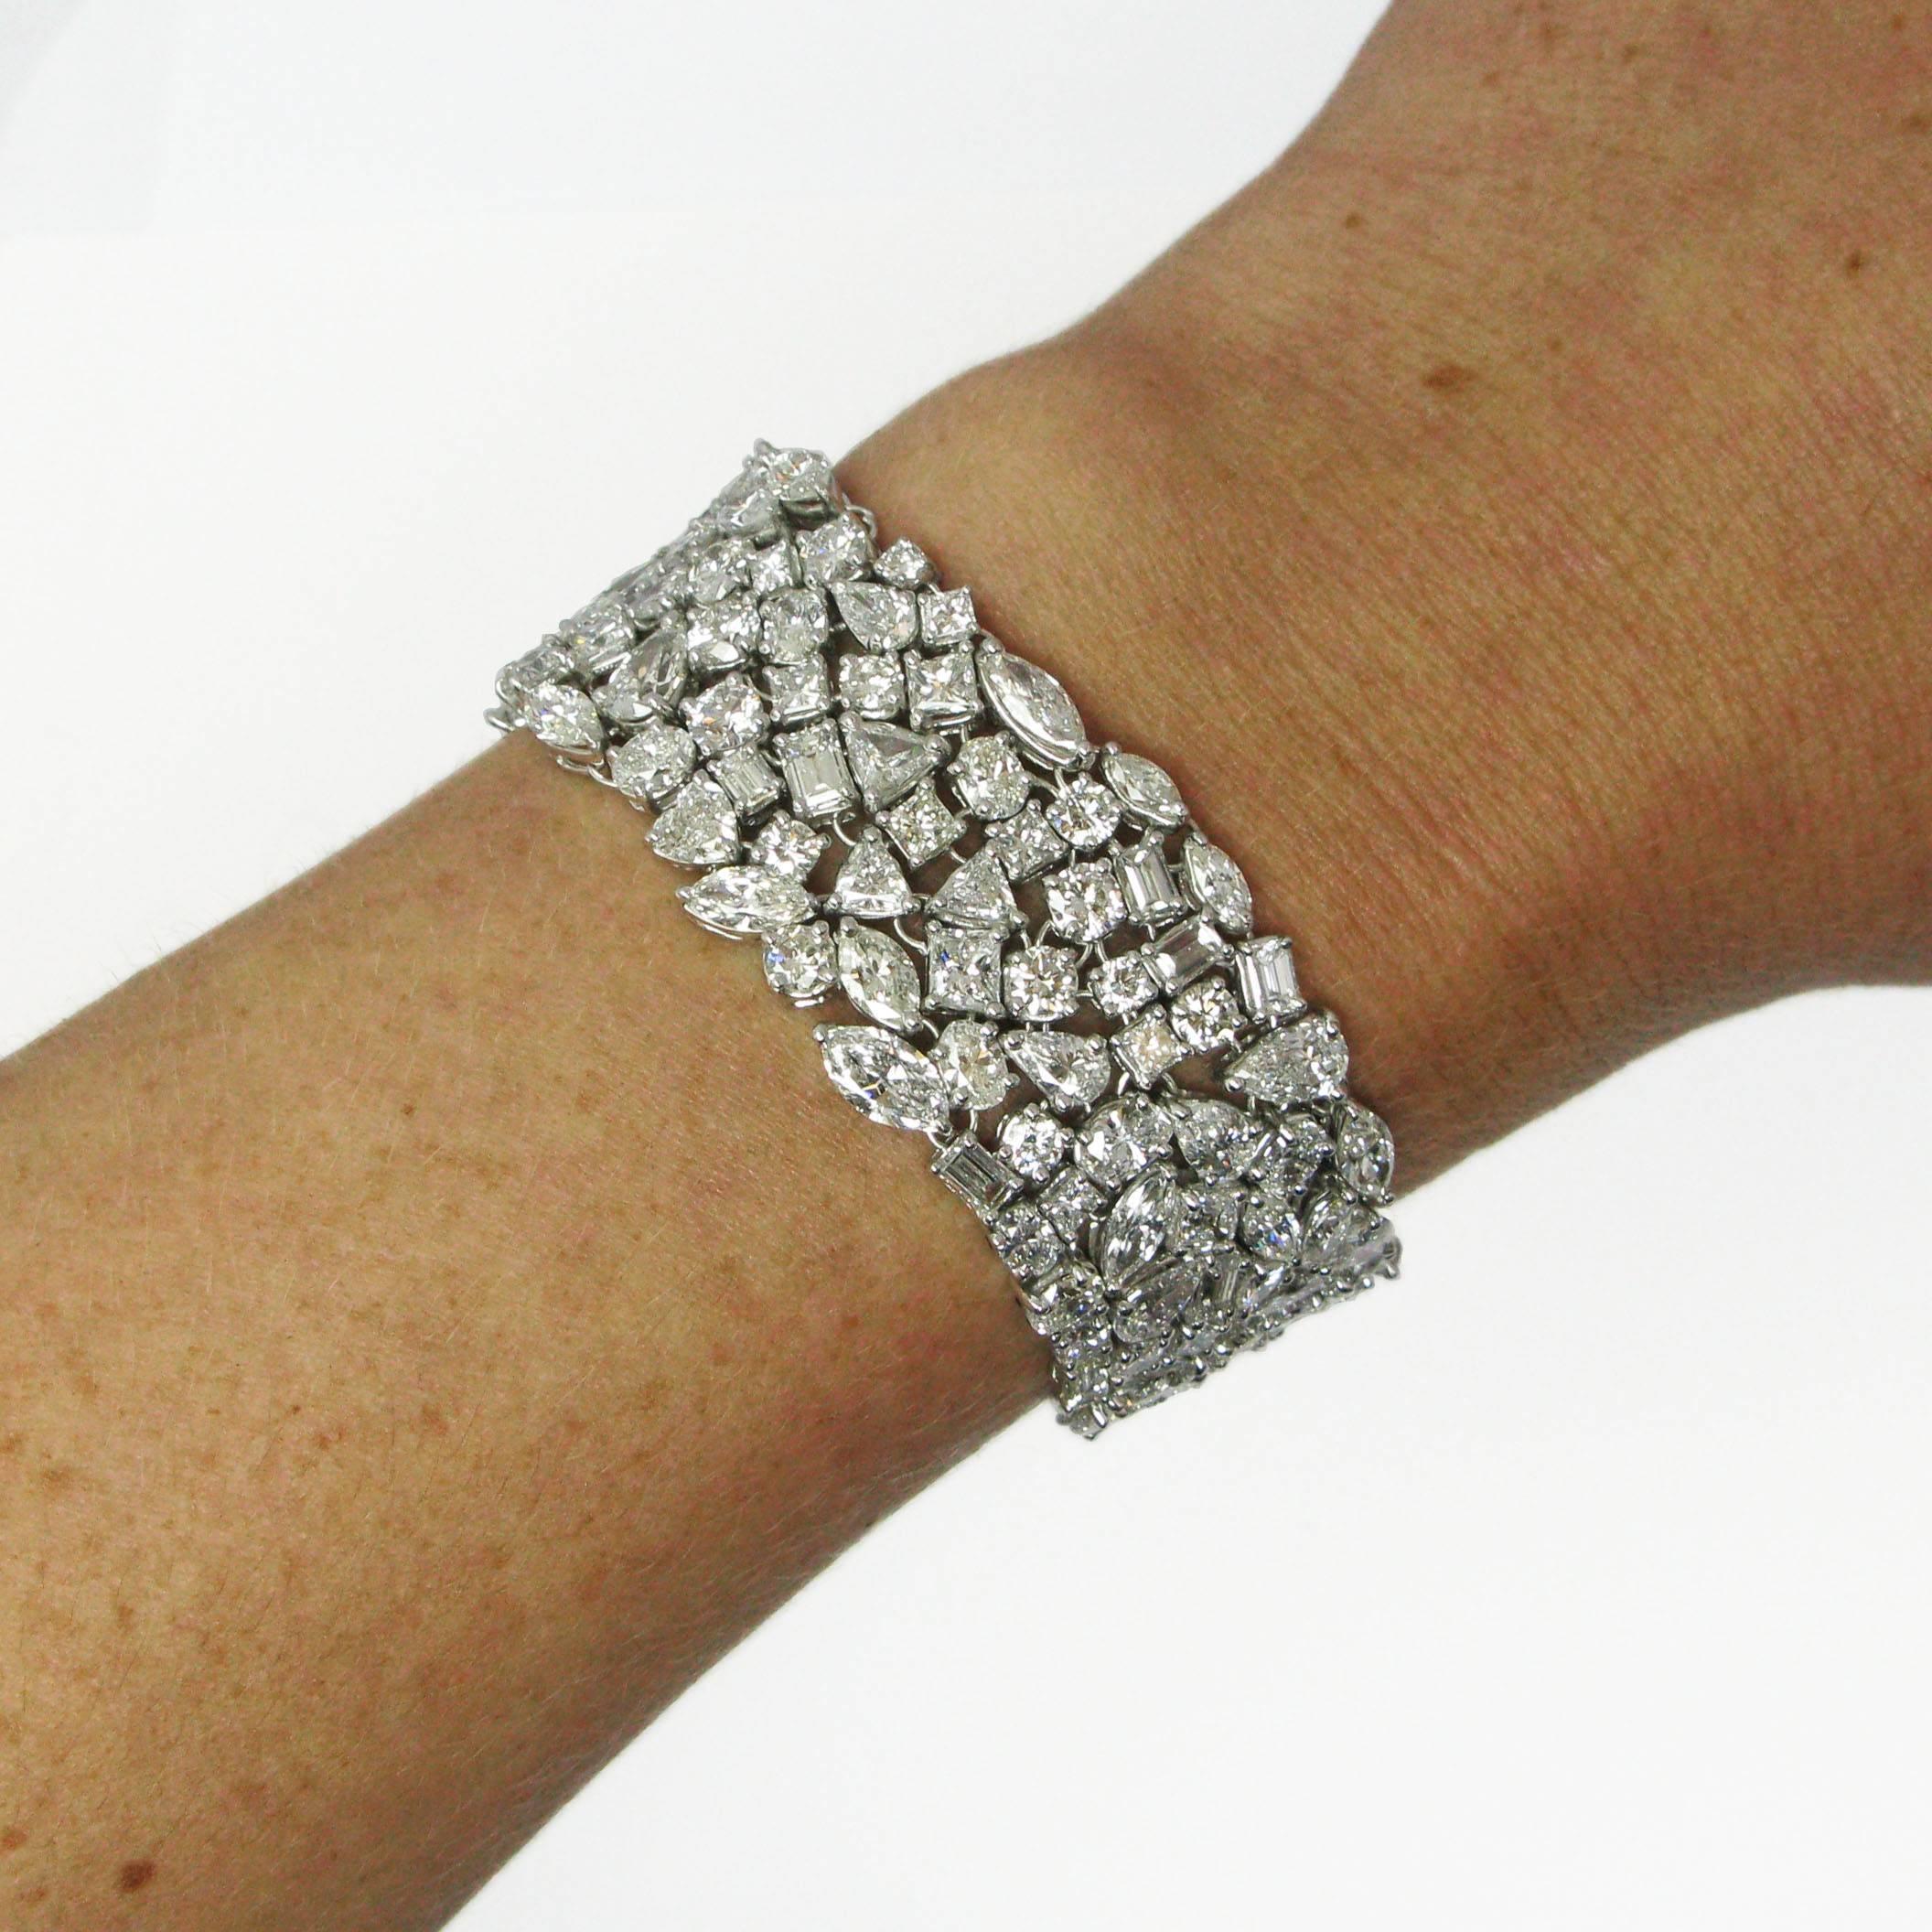 An incredible bracelet composed of 55.26 carats of marquise, round brilliant, princess, trillion, baguette, pear, oval, and asscher cut diamonds. Each diamond is individually set in a custom-made platinum basket, and linked by hand to form an